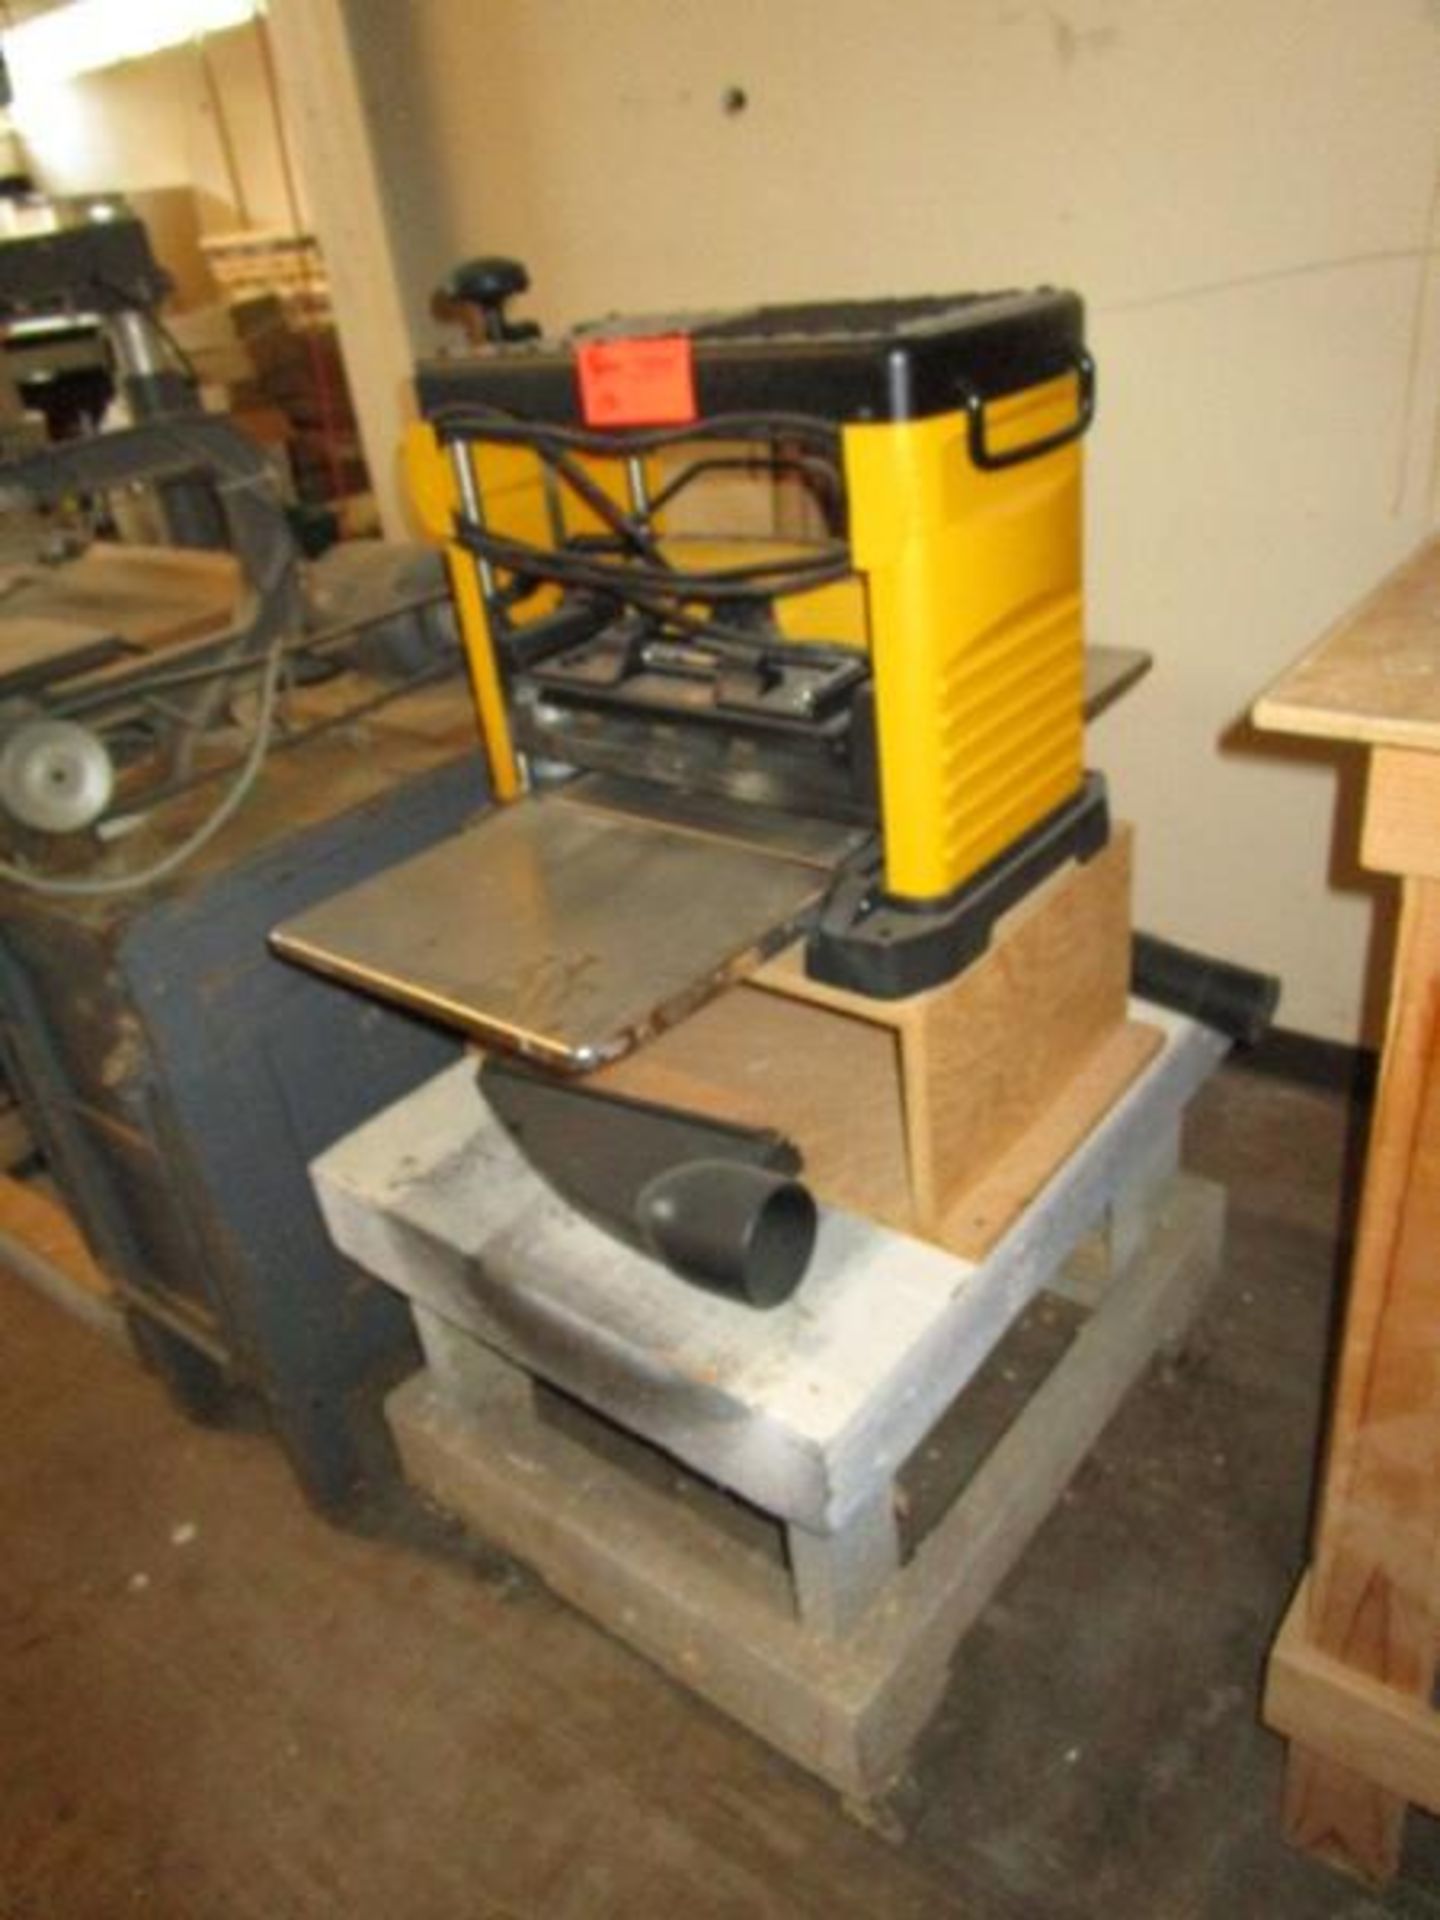 Thickness Planer w/ Stant by Delta, Model: DW733 - Image 3 of 7